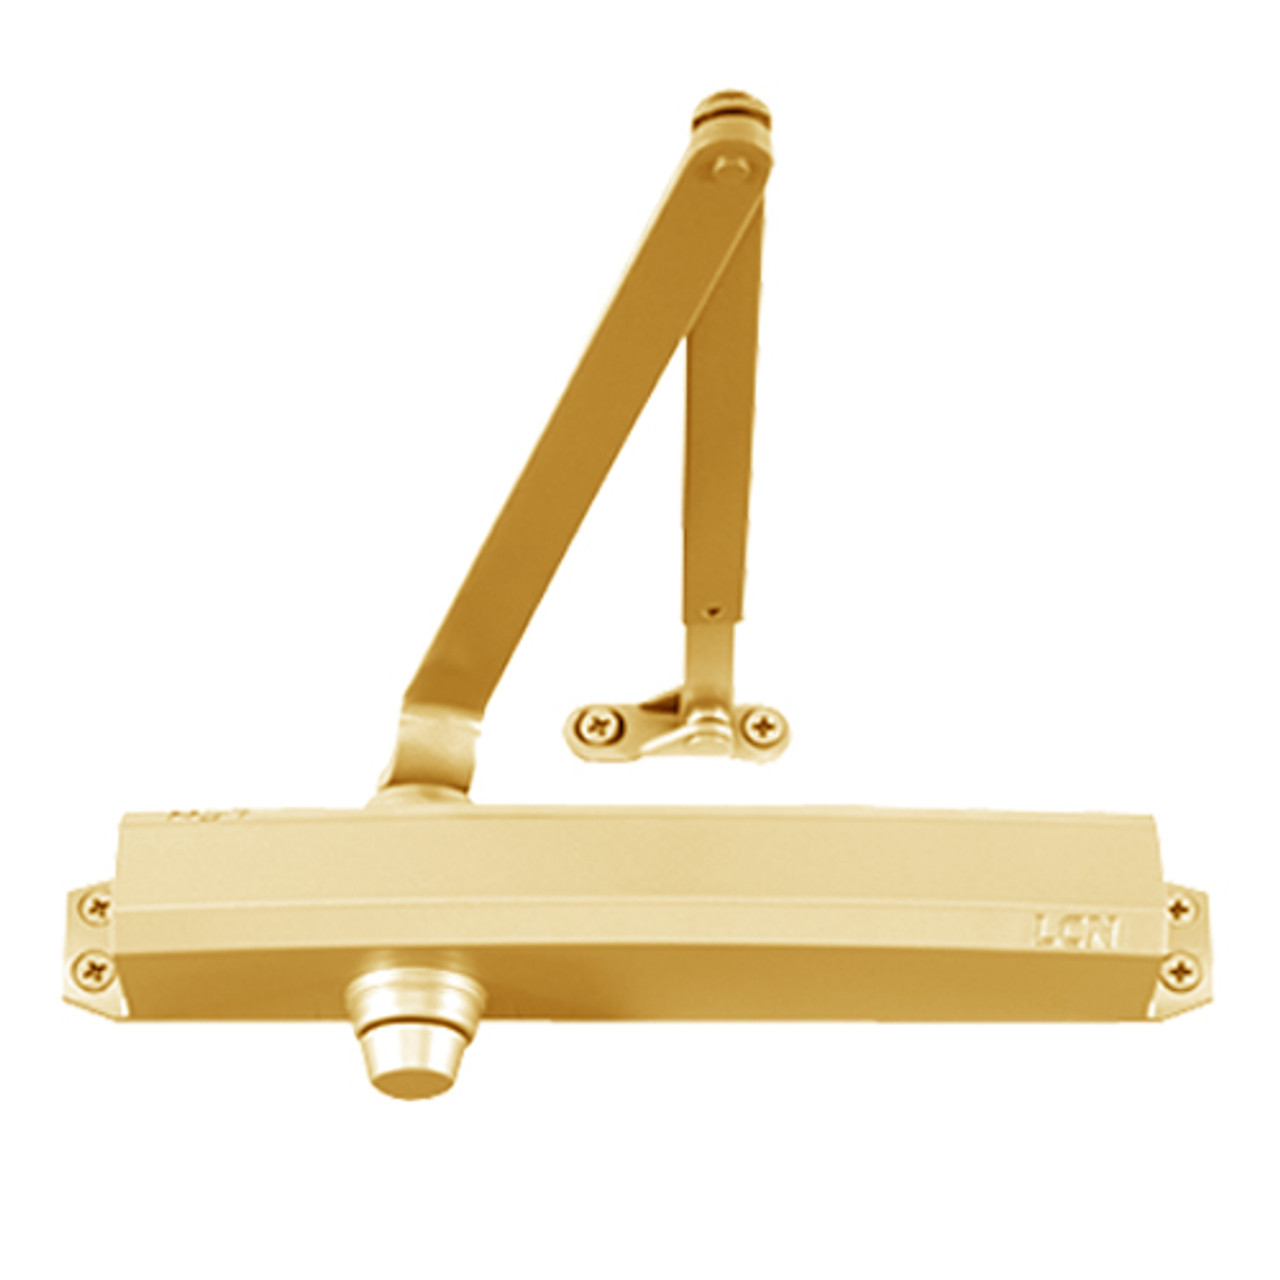 1450-EDA-w-62G-BRASS LCN Surface Mount Door Closer with Extra Duty Arm and Thick Hub Shoe in BRASS Finish